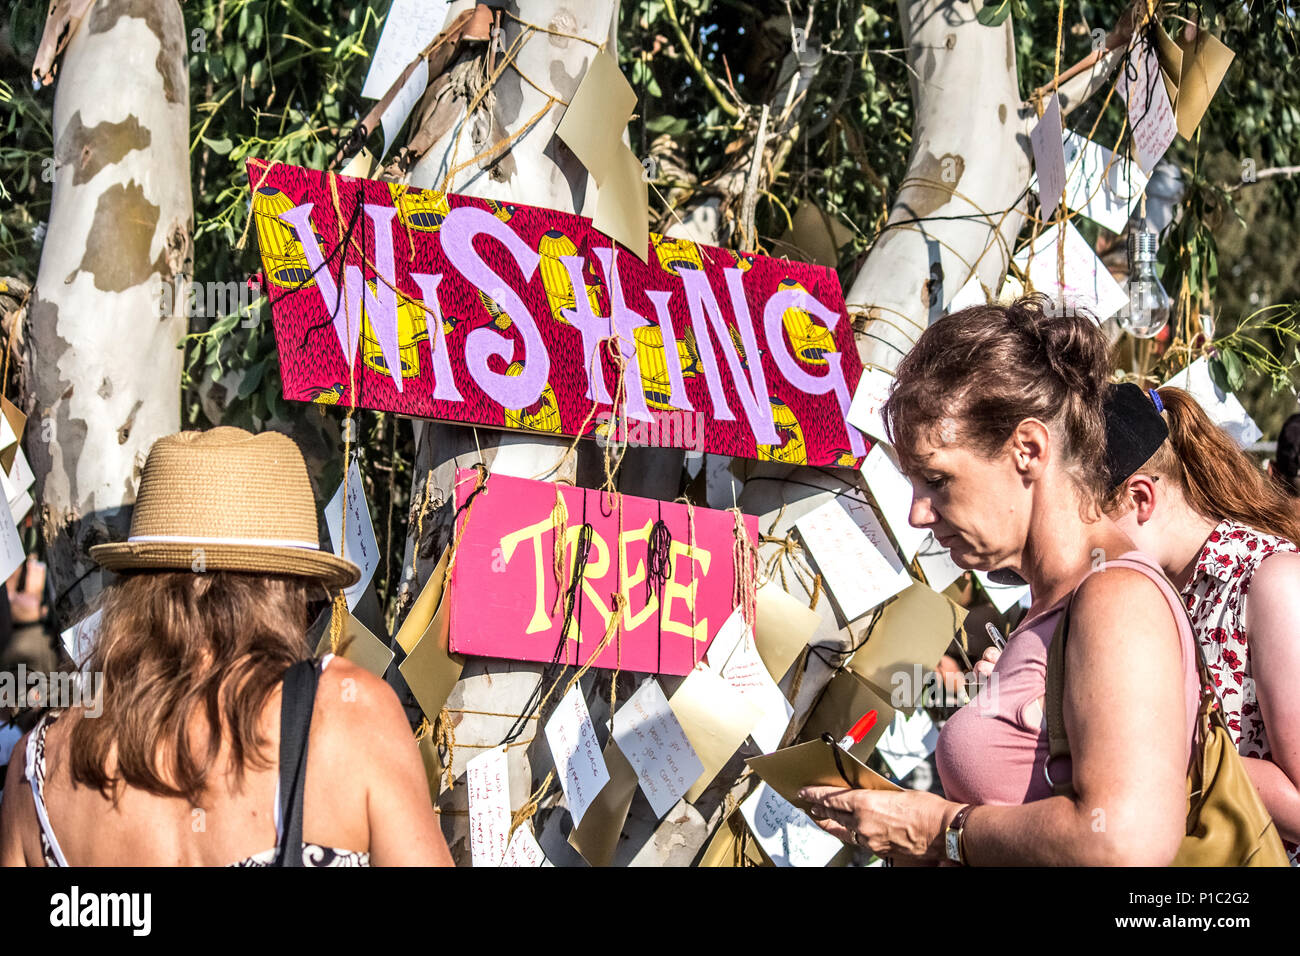 Two women writing wishes at a wishing tree based at a UK festival. Stock Photo